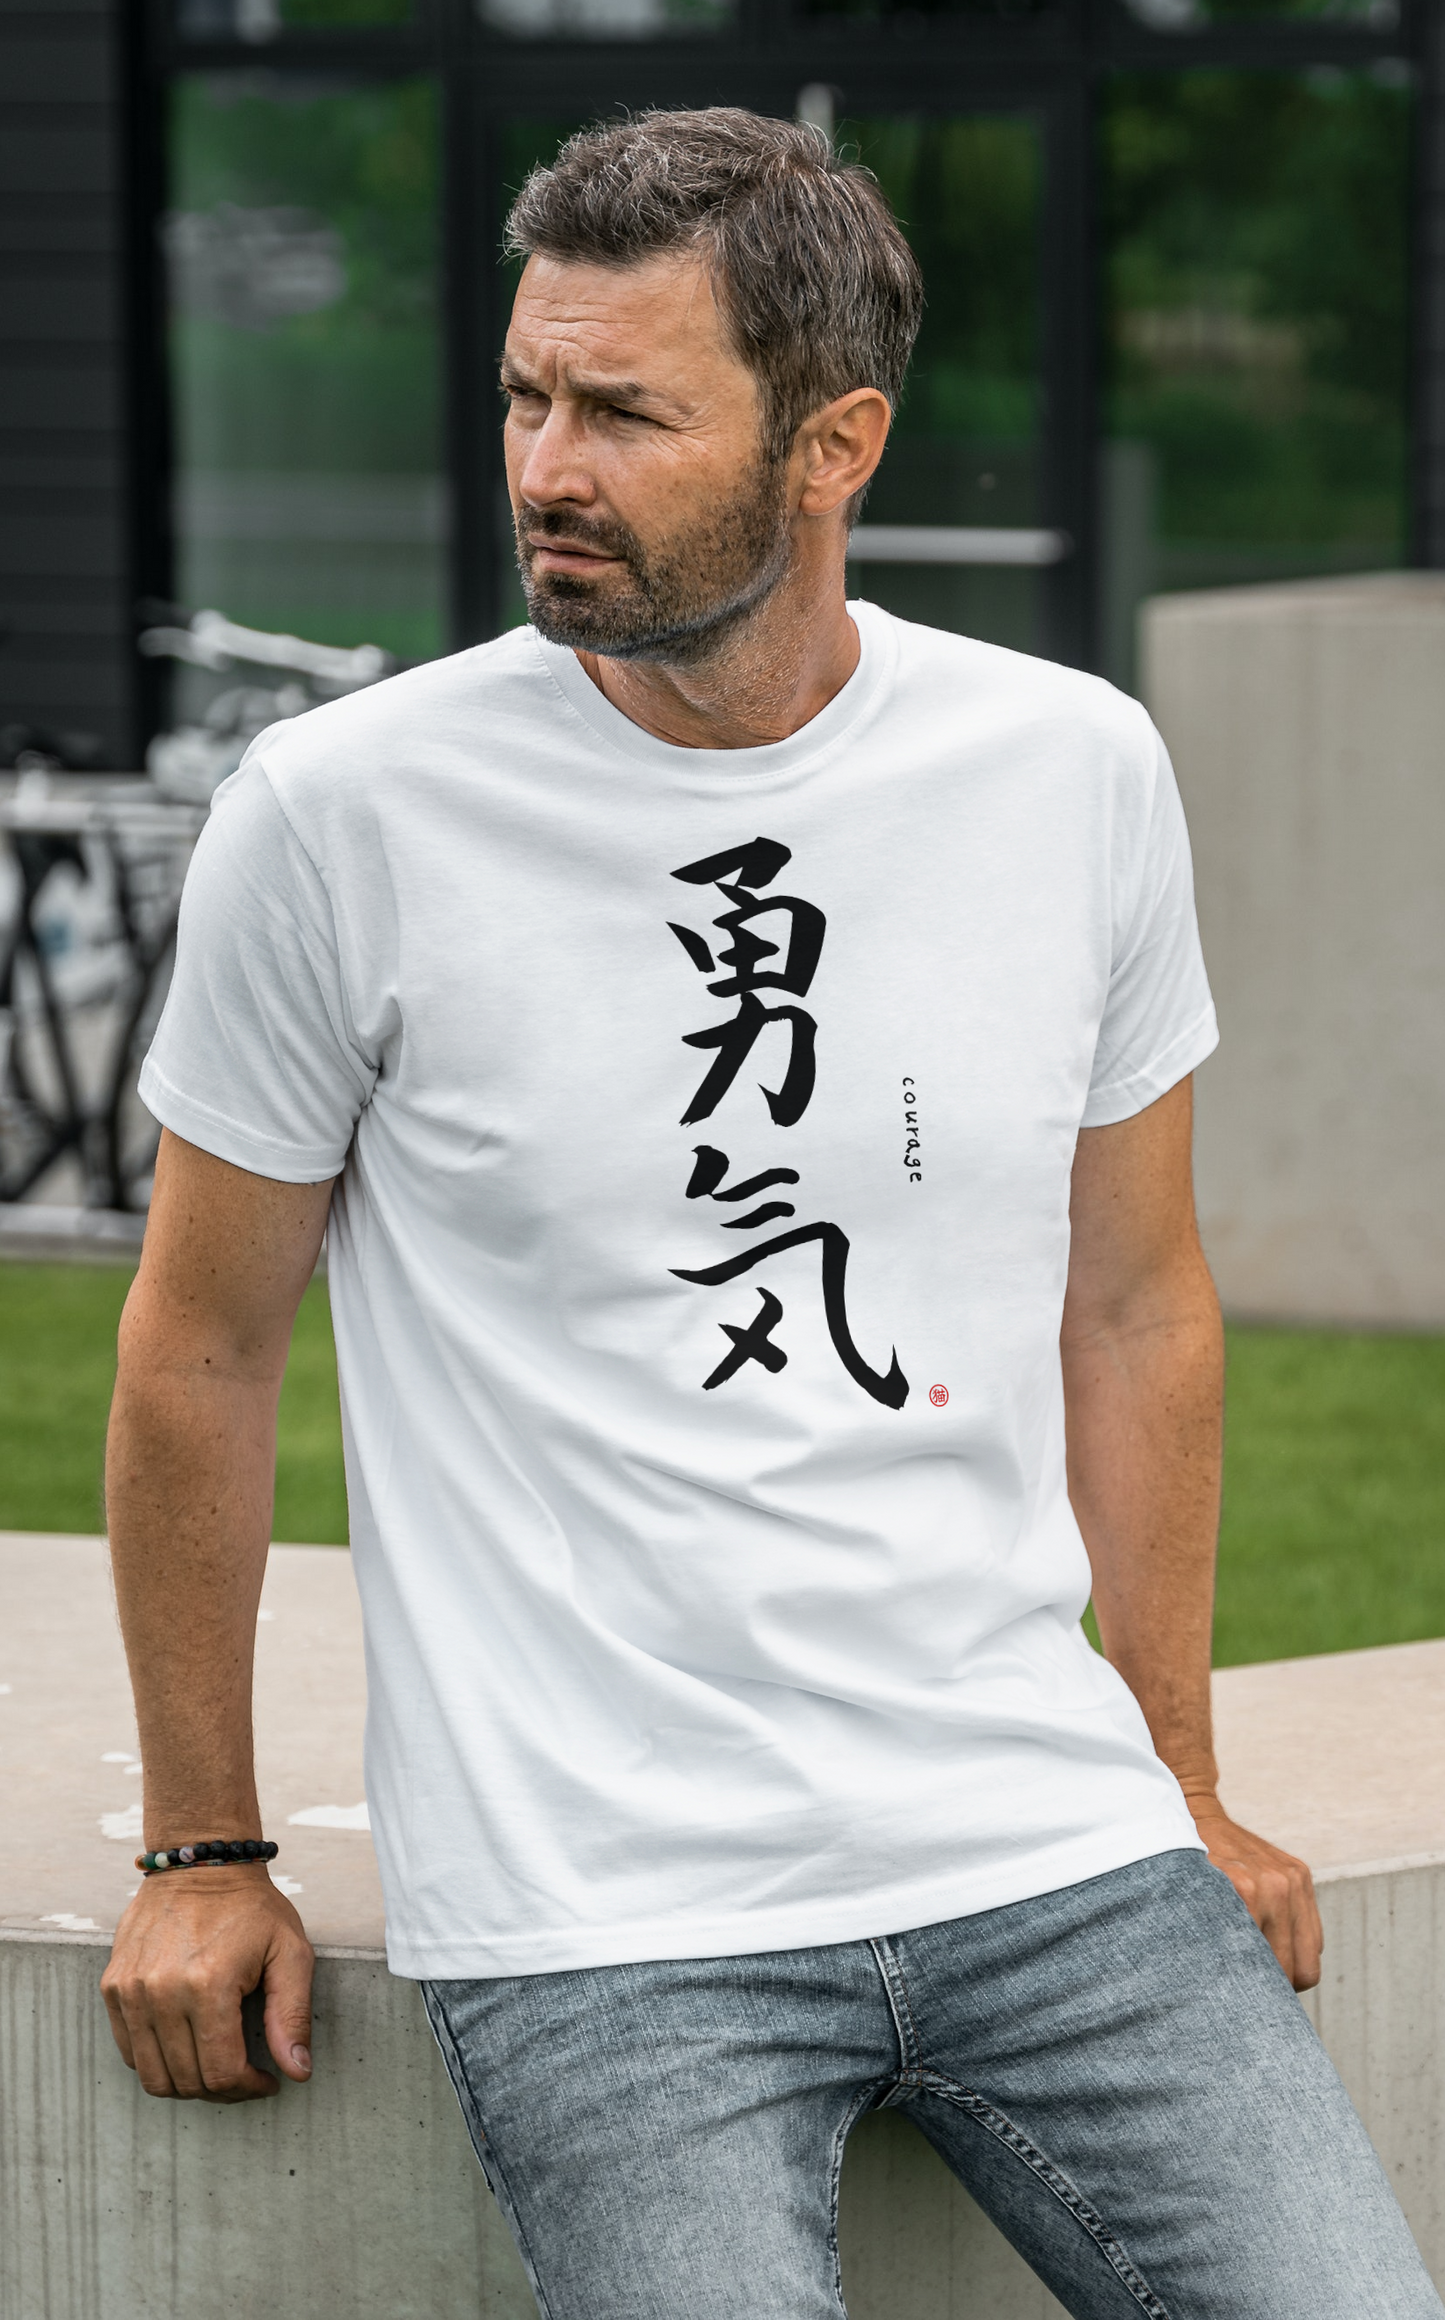 Courage-Written in Japanese characters